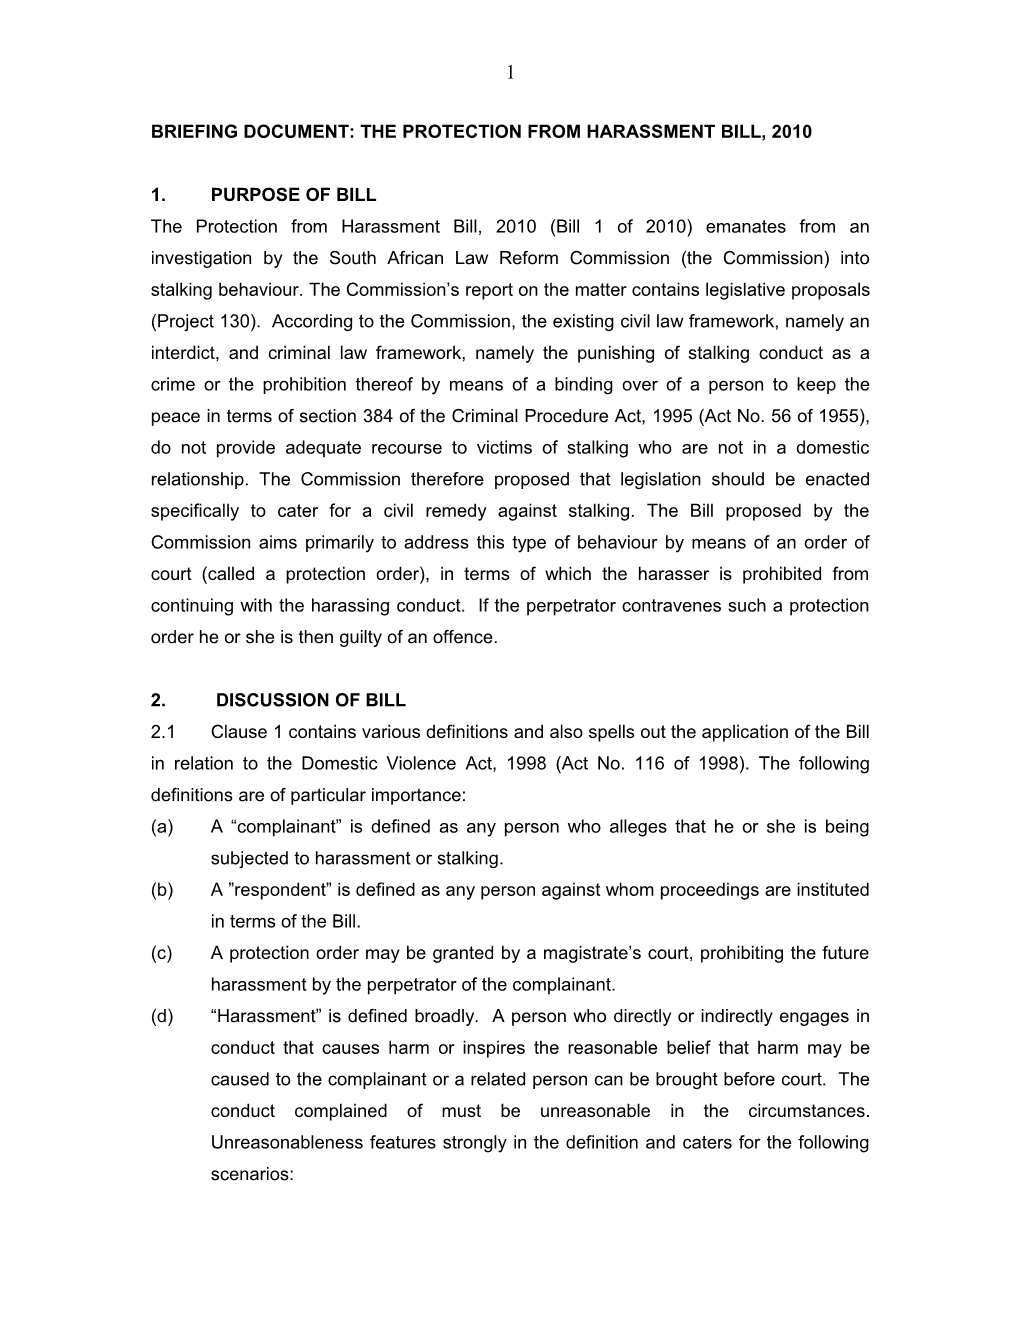 Briefing Document: the Protection from Harassment Bill, 2009